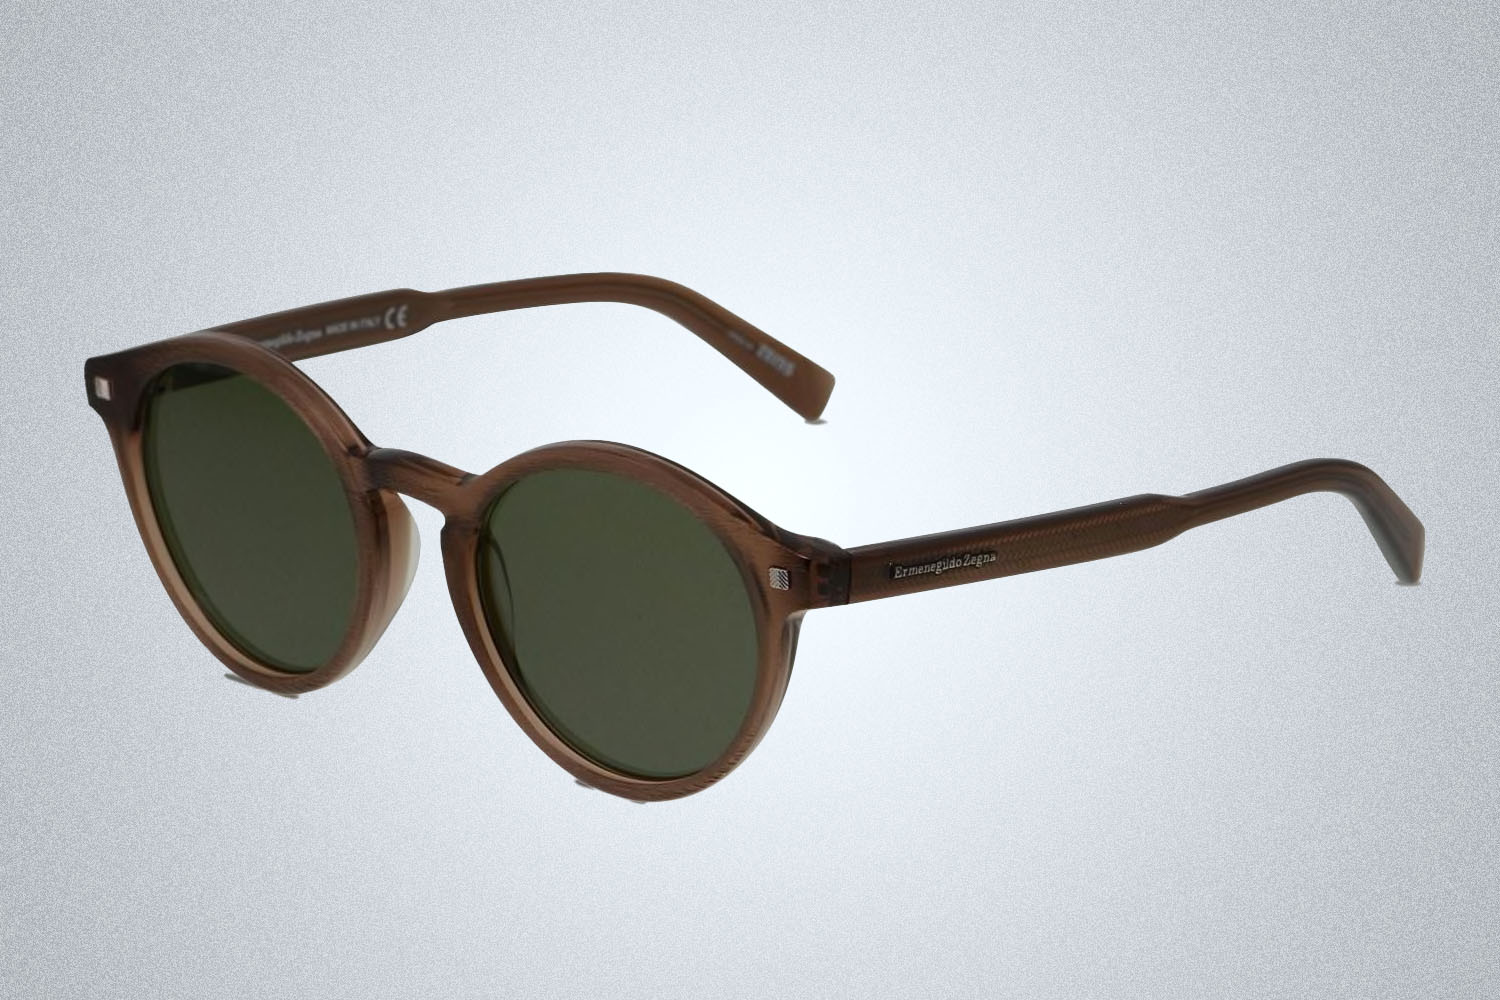 a pair of designer sunglasses from Zegna on a grey background